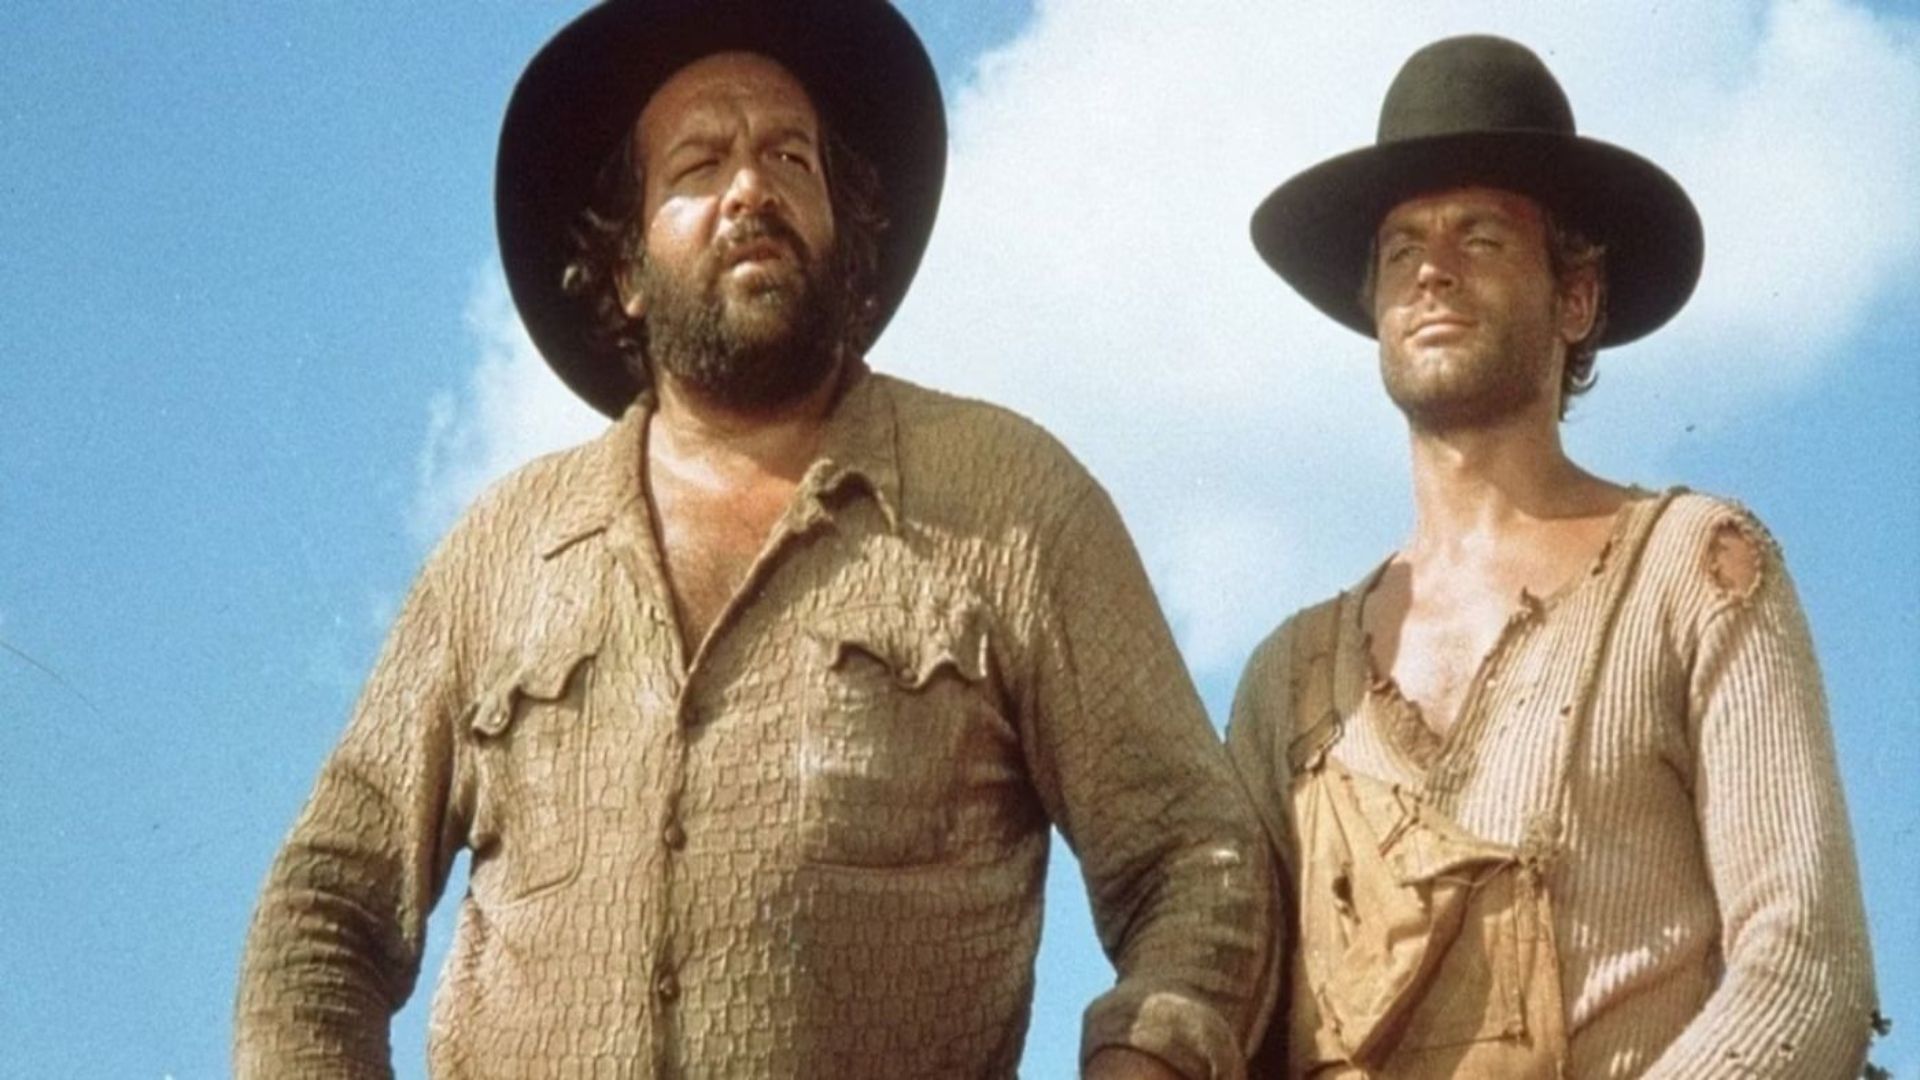 Bud Spencer and Terence Hill in They Call Me Trinity (1970)